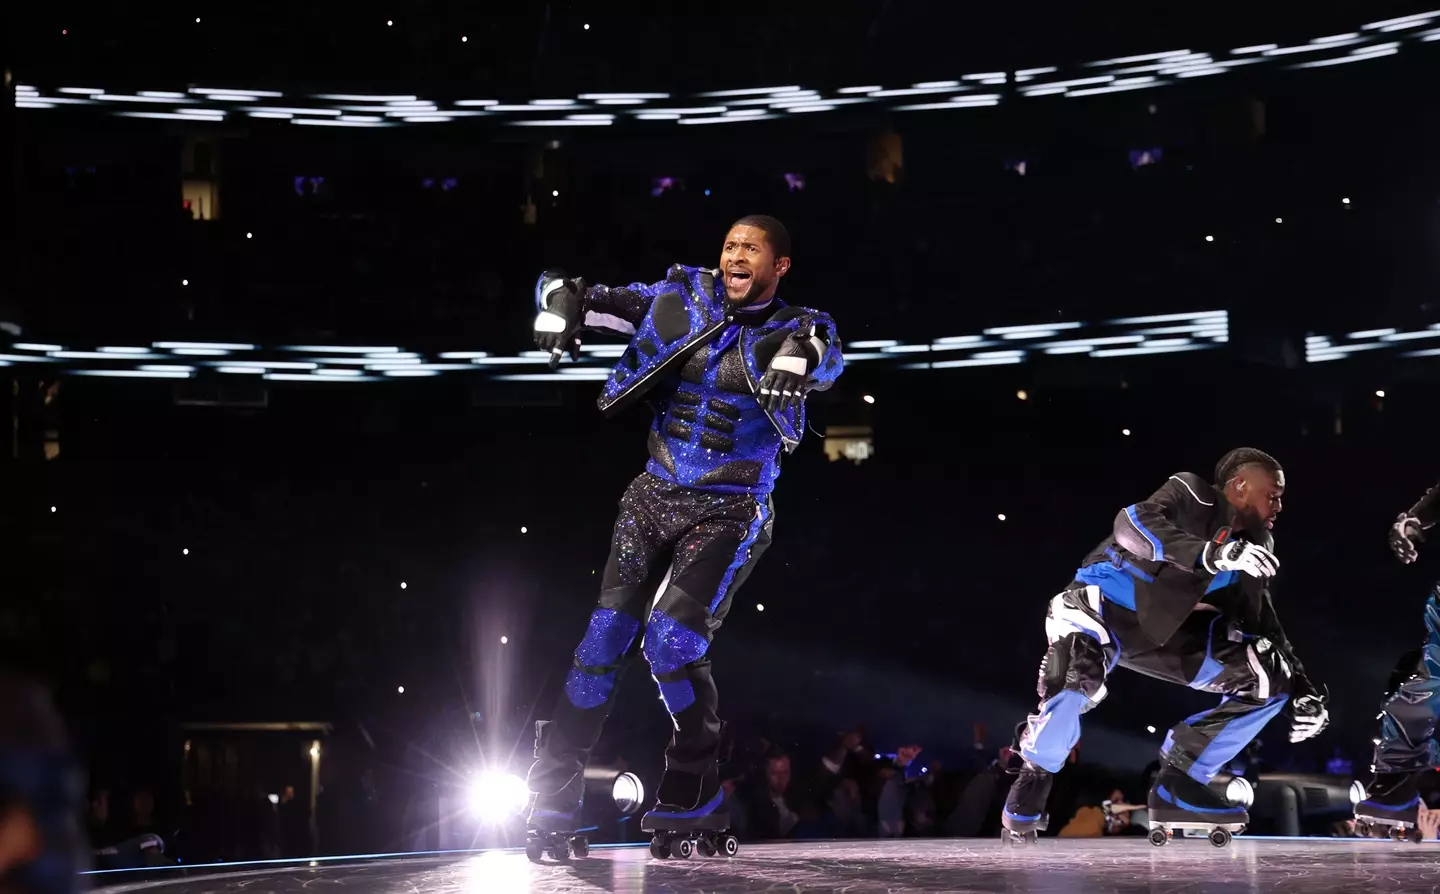 Plenty of fans think Usher's gloves were a tribute to Michael Jackson.